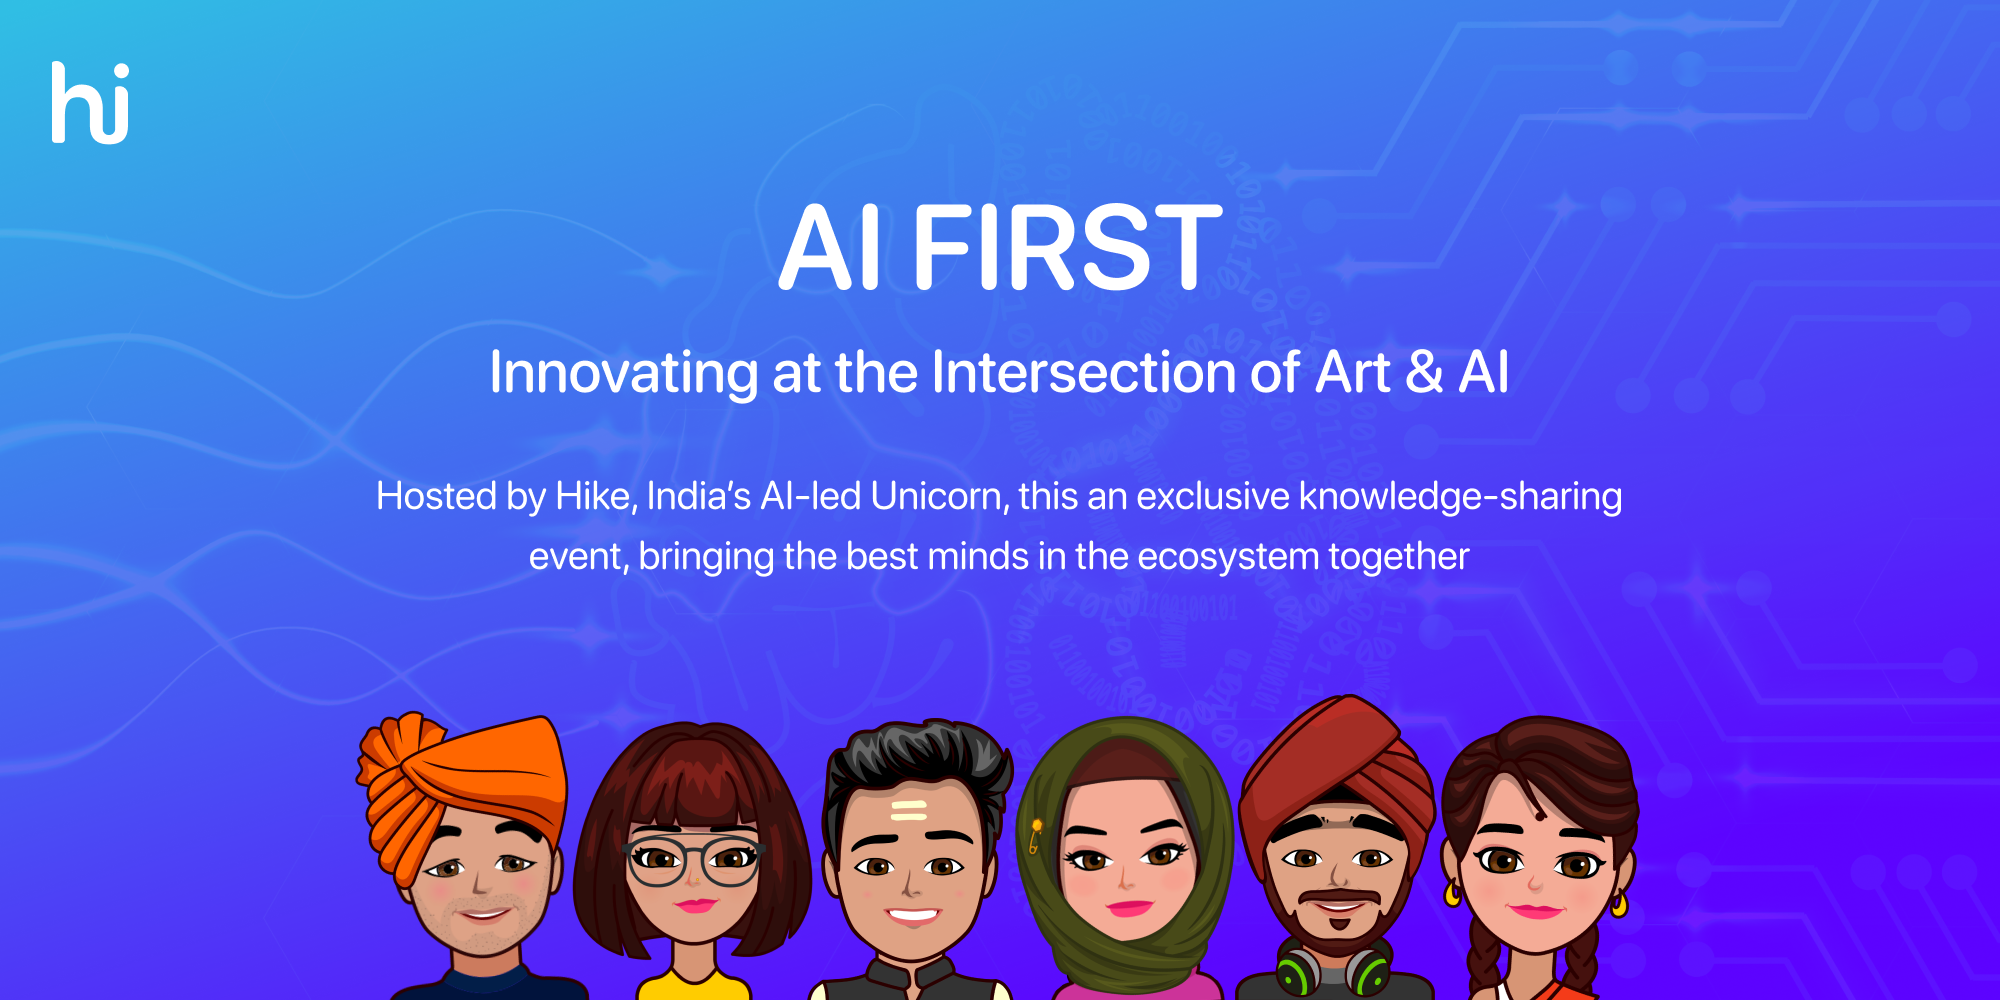 AI and art magic: Learn how Hike is innovating at the intersection of AI and art at their exclusive  AI First event in Bengaluru